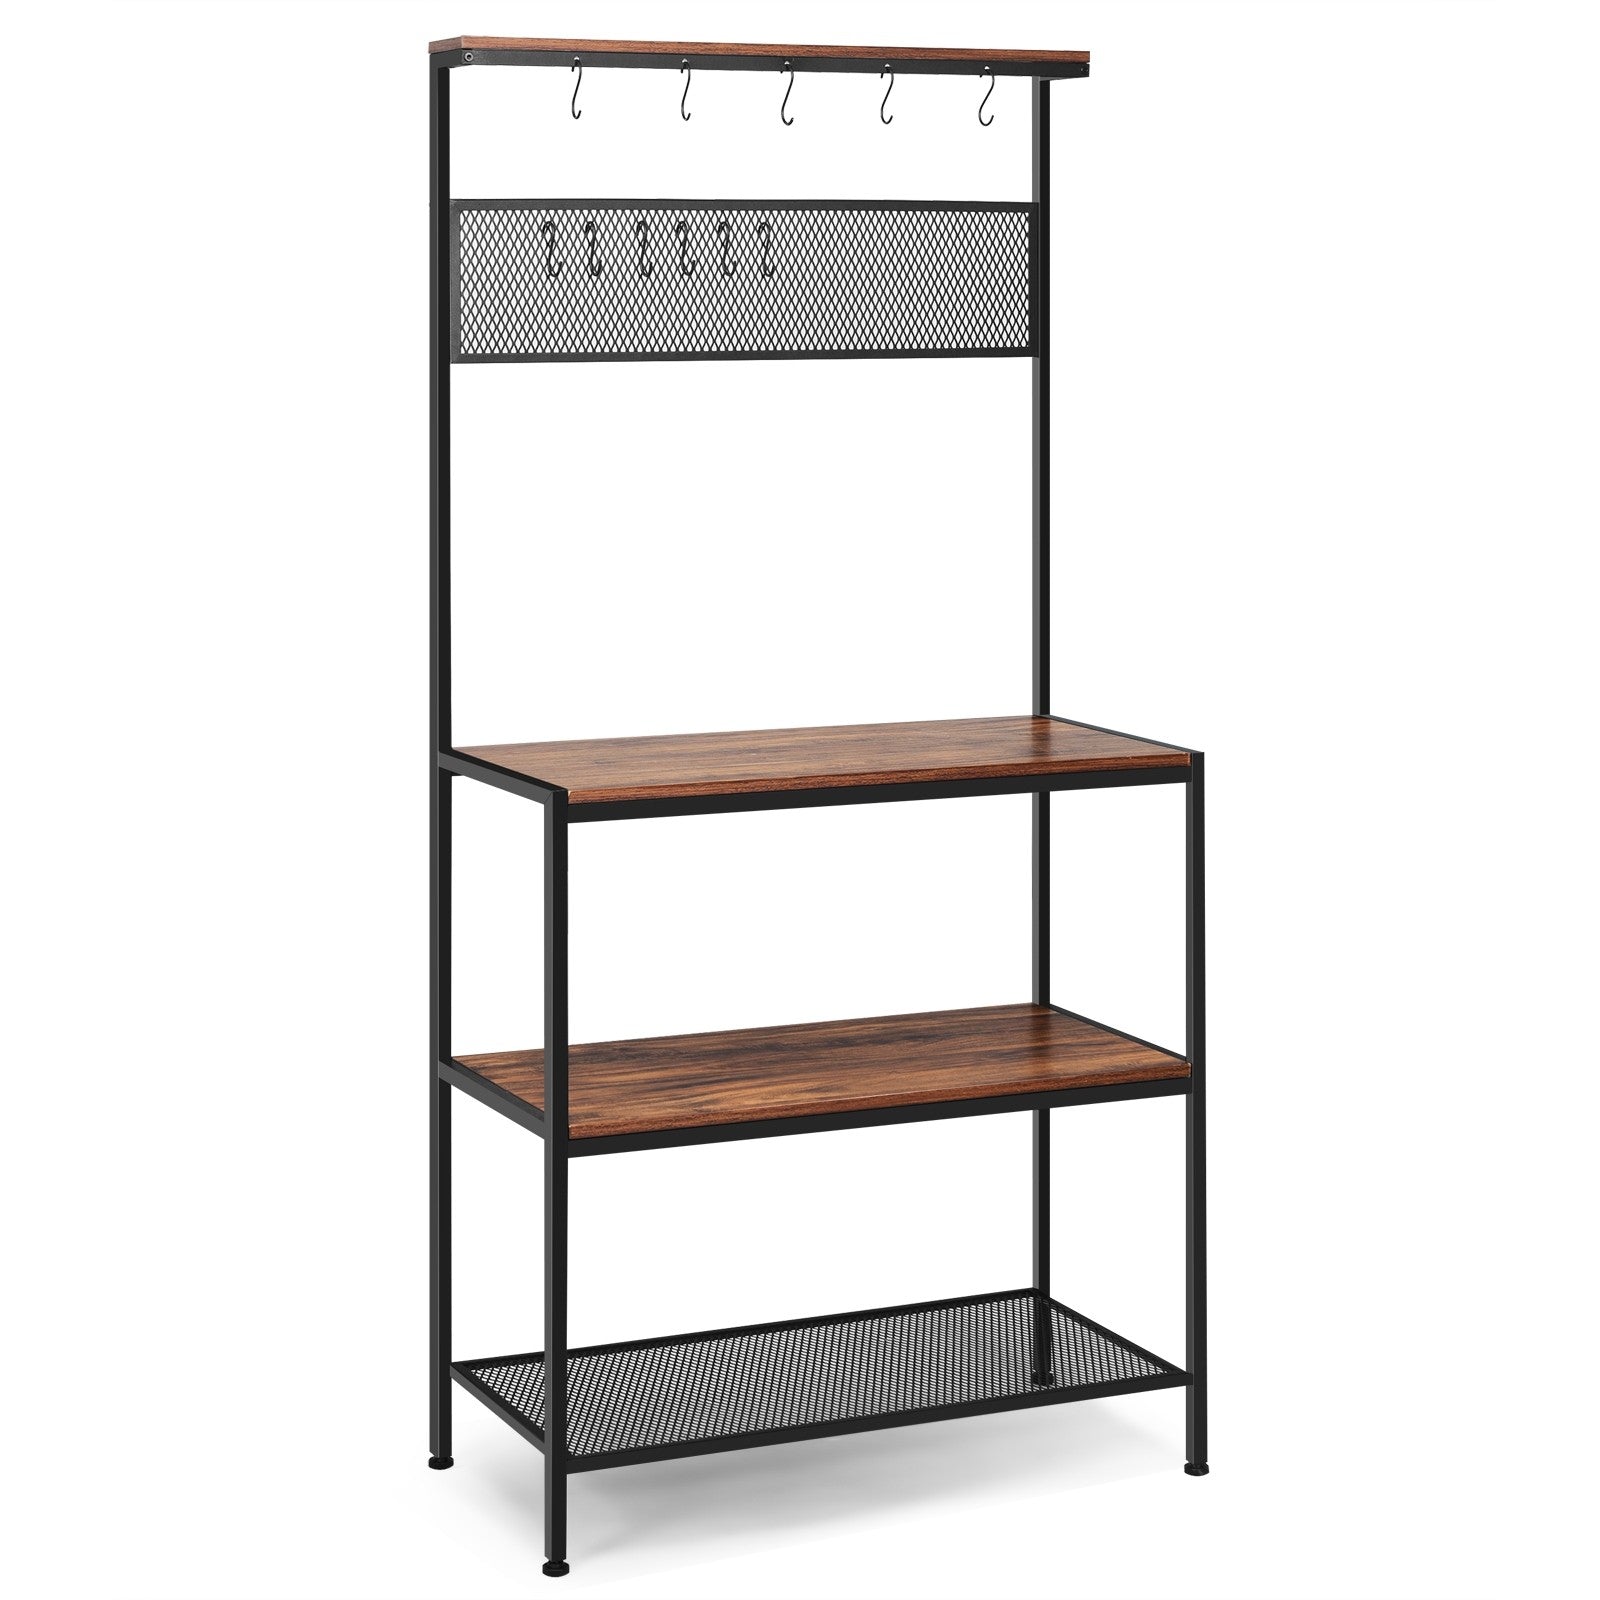 Kitchen Baker's Rack, Industrial Microwave Oven Stand